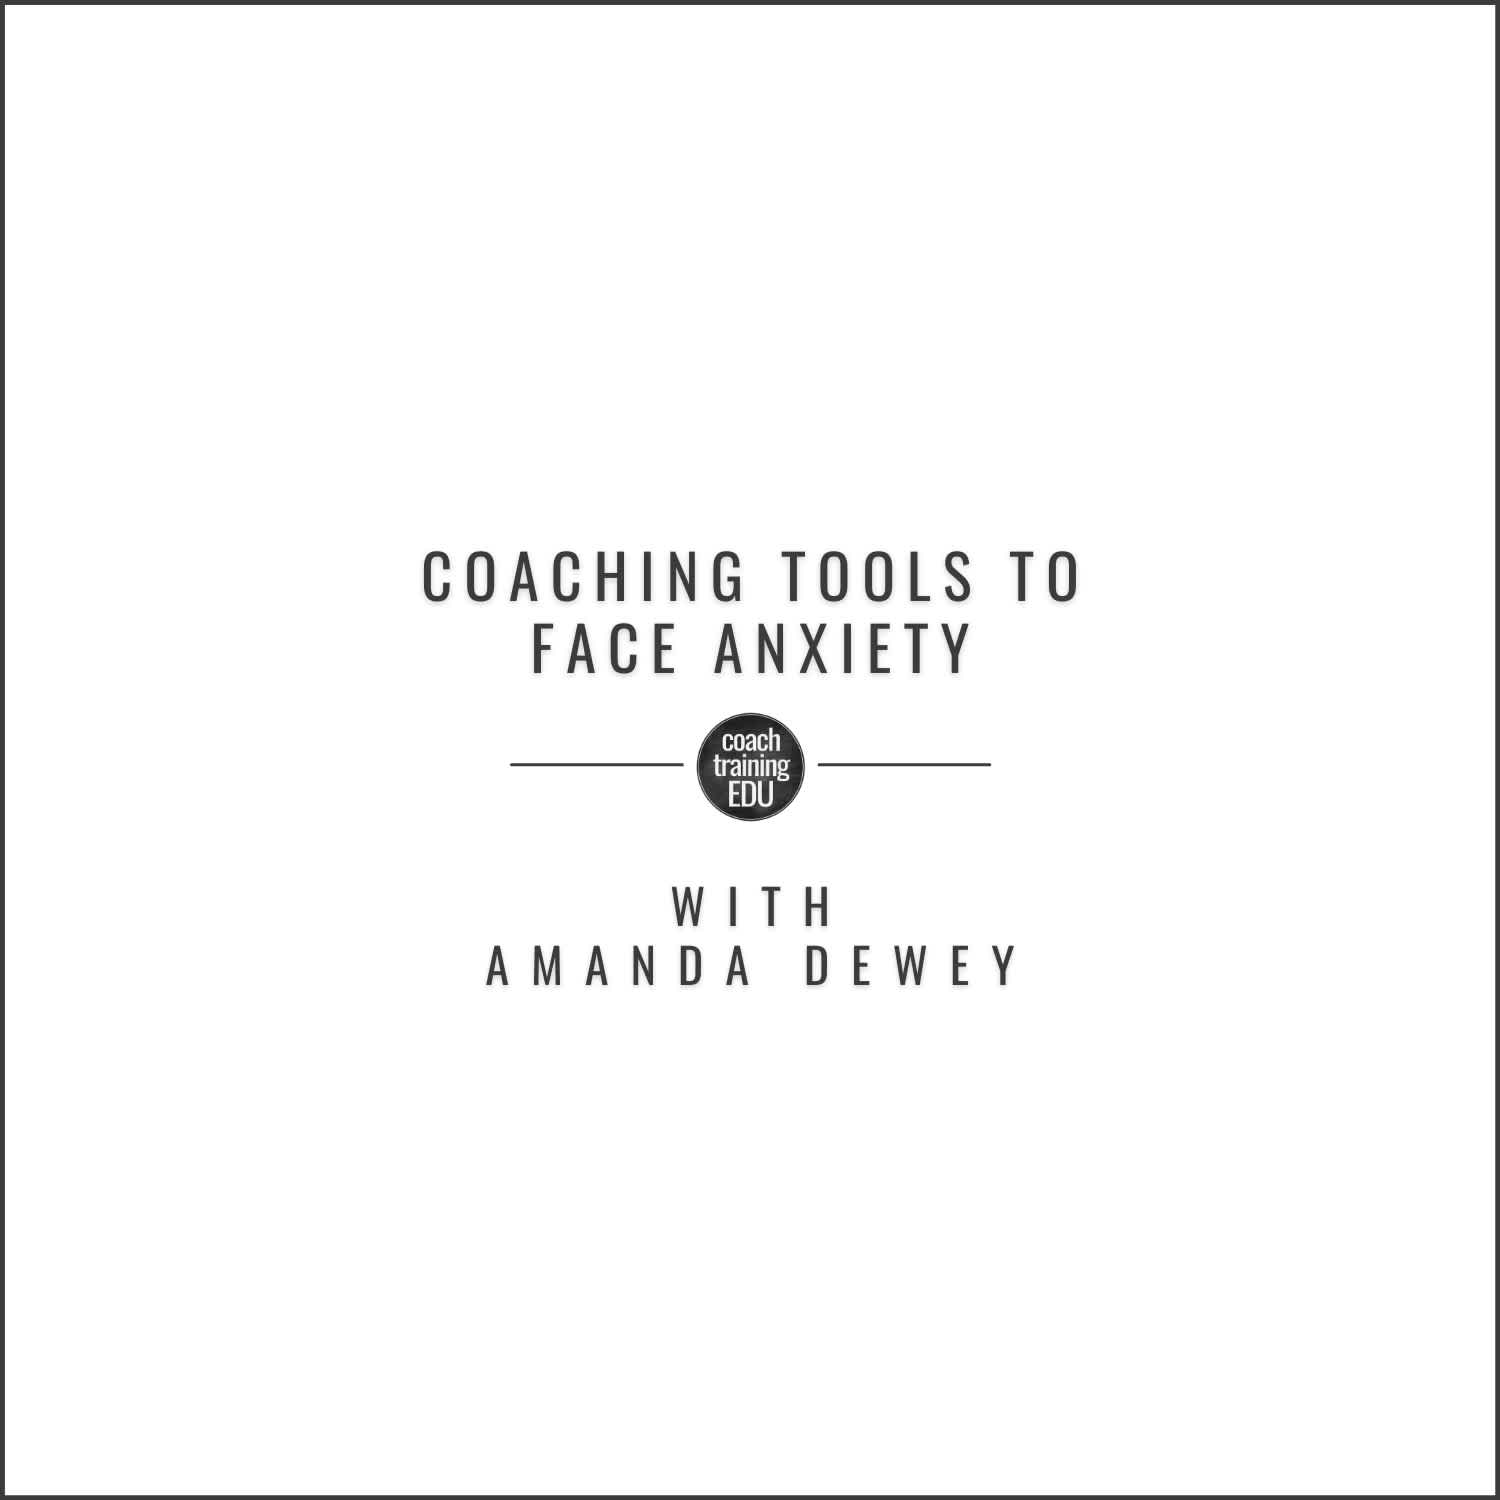 Coaching Tools to Face Anxiety with Amanda Dewey